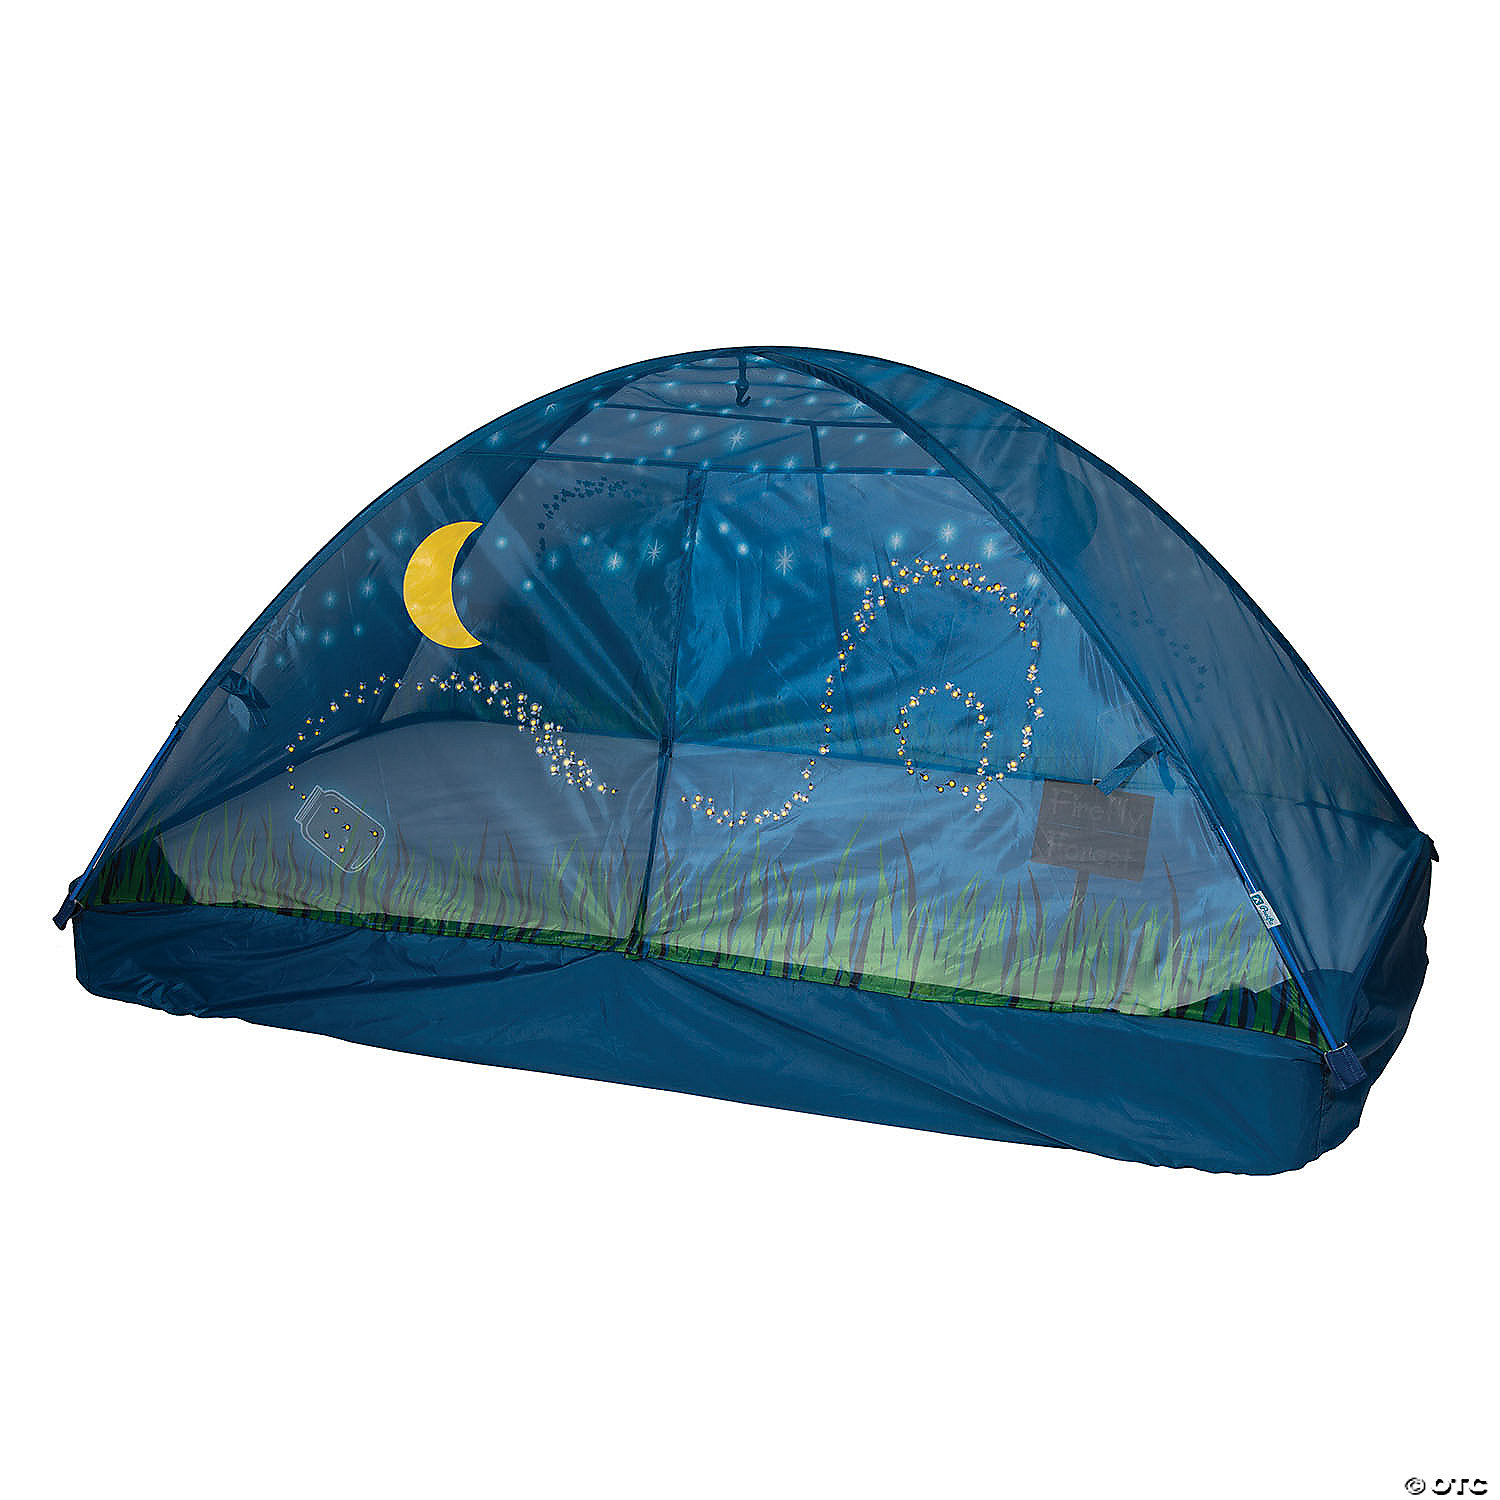 Pacific Play Tents Firefly Bed Tent, Twin Bed Play Tent